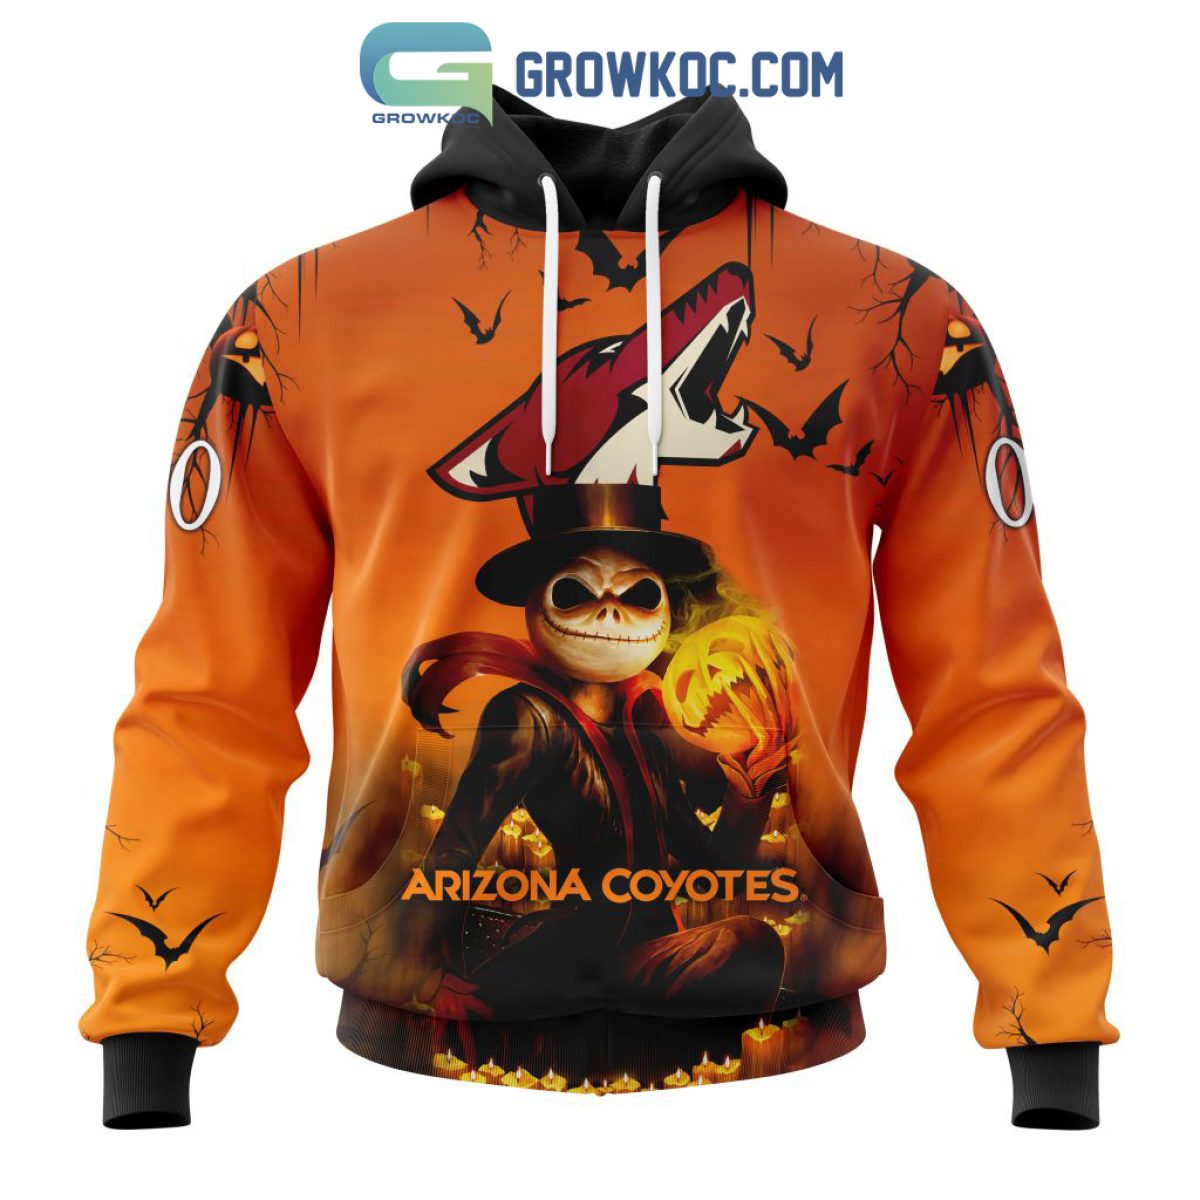 Arizona Coyotes NHL Special Design Jersey With Your Ribs For Halloween  Hoodie T Shirt - Growkoc